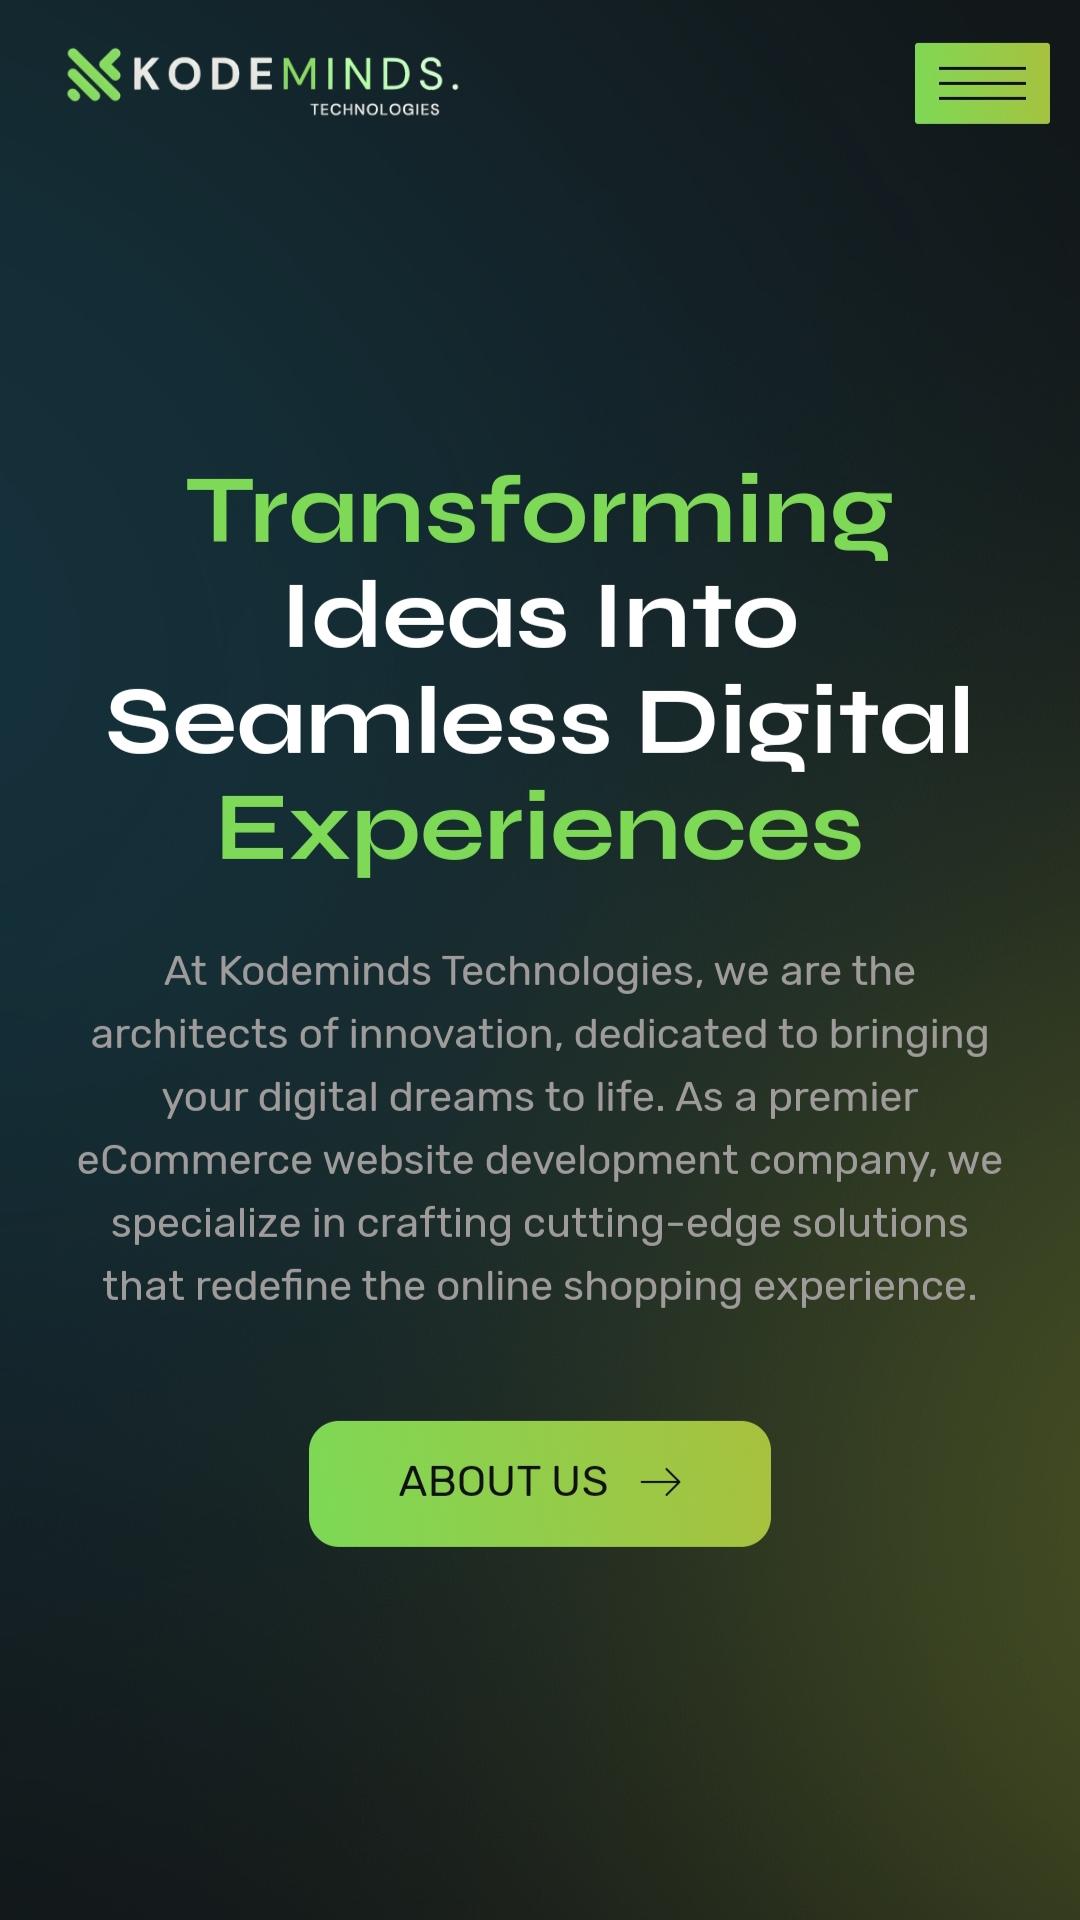 kodeminds eCommerce website services experience